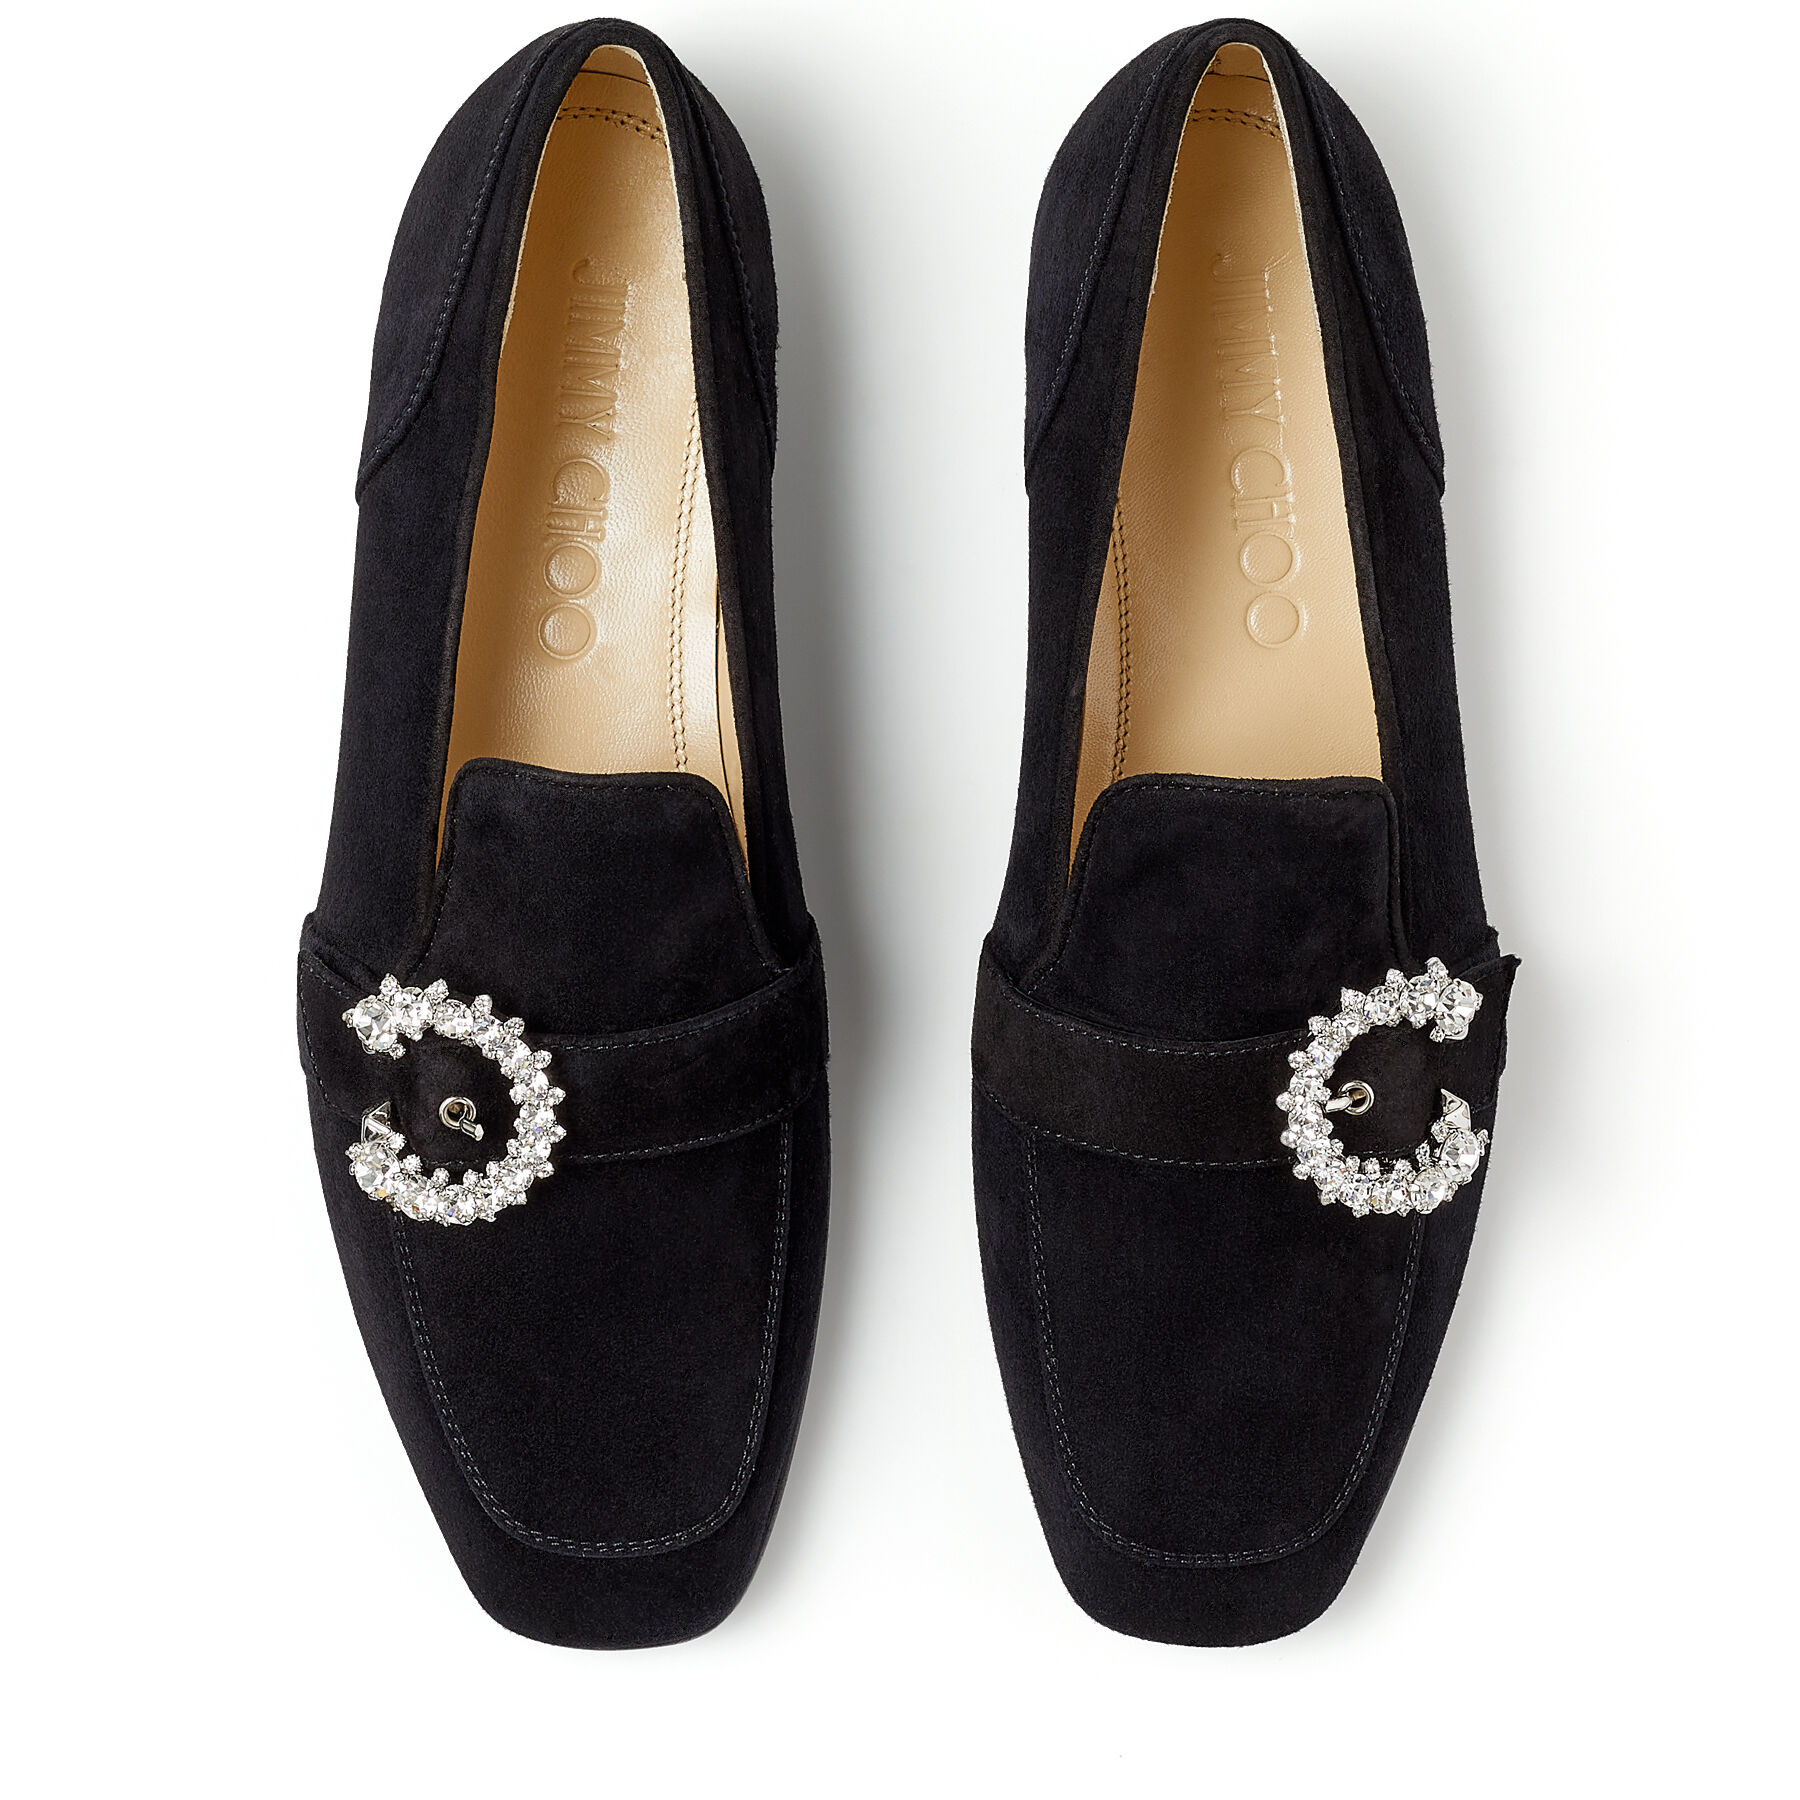 Black Suede Loafers with Crystal Buckle | MANI FLAT | High Summer 2021 ...